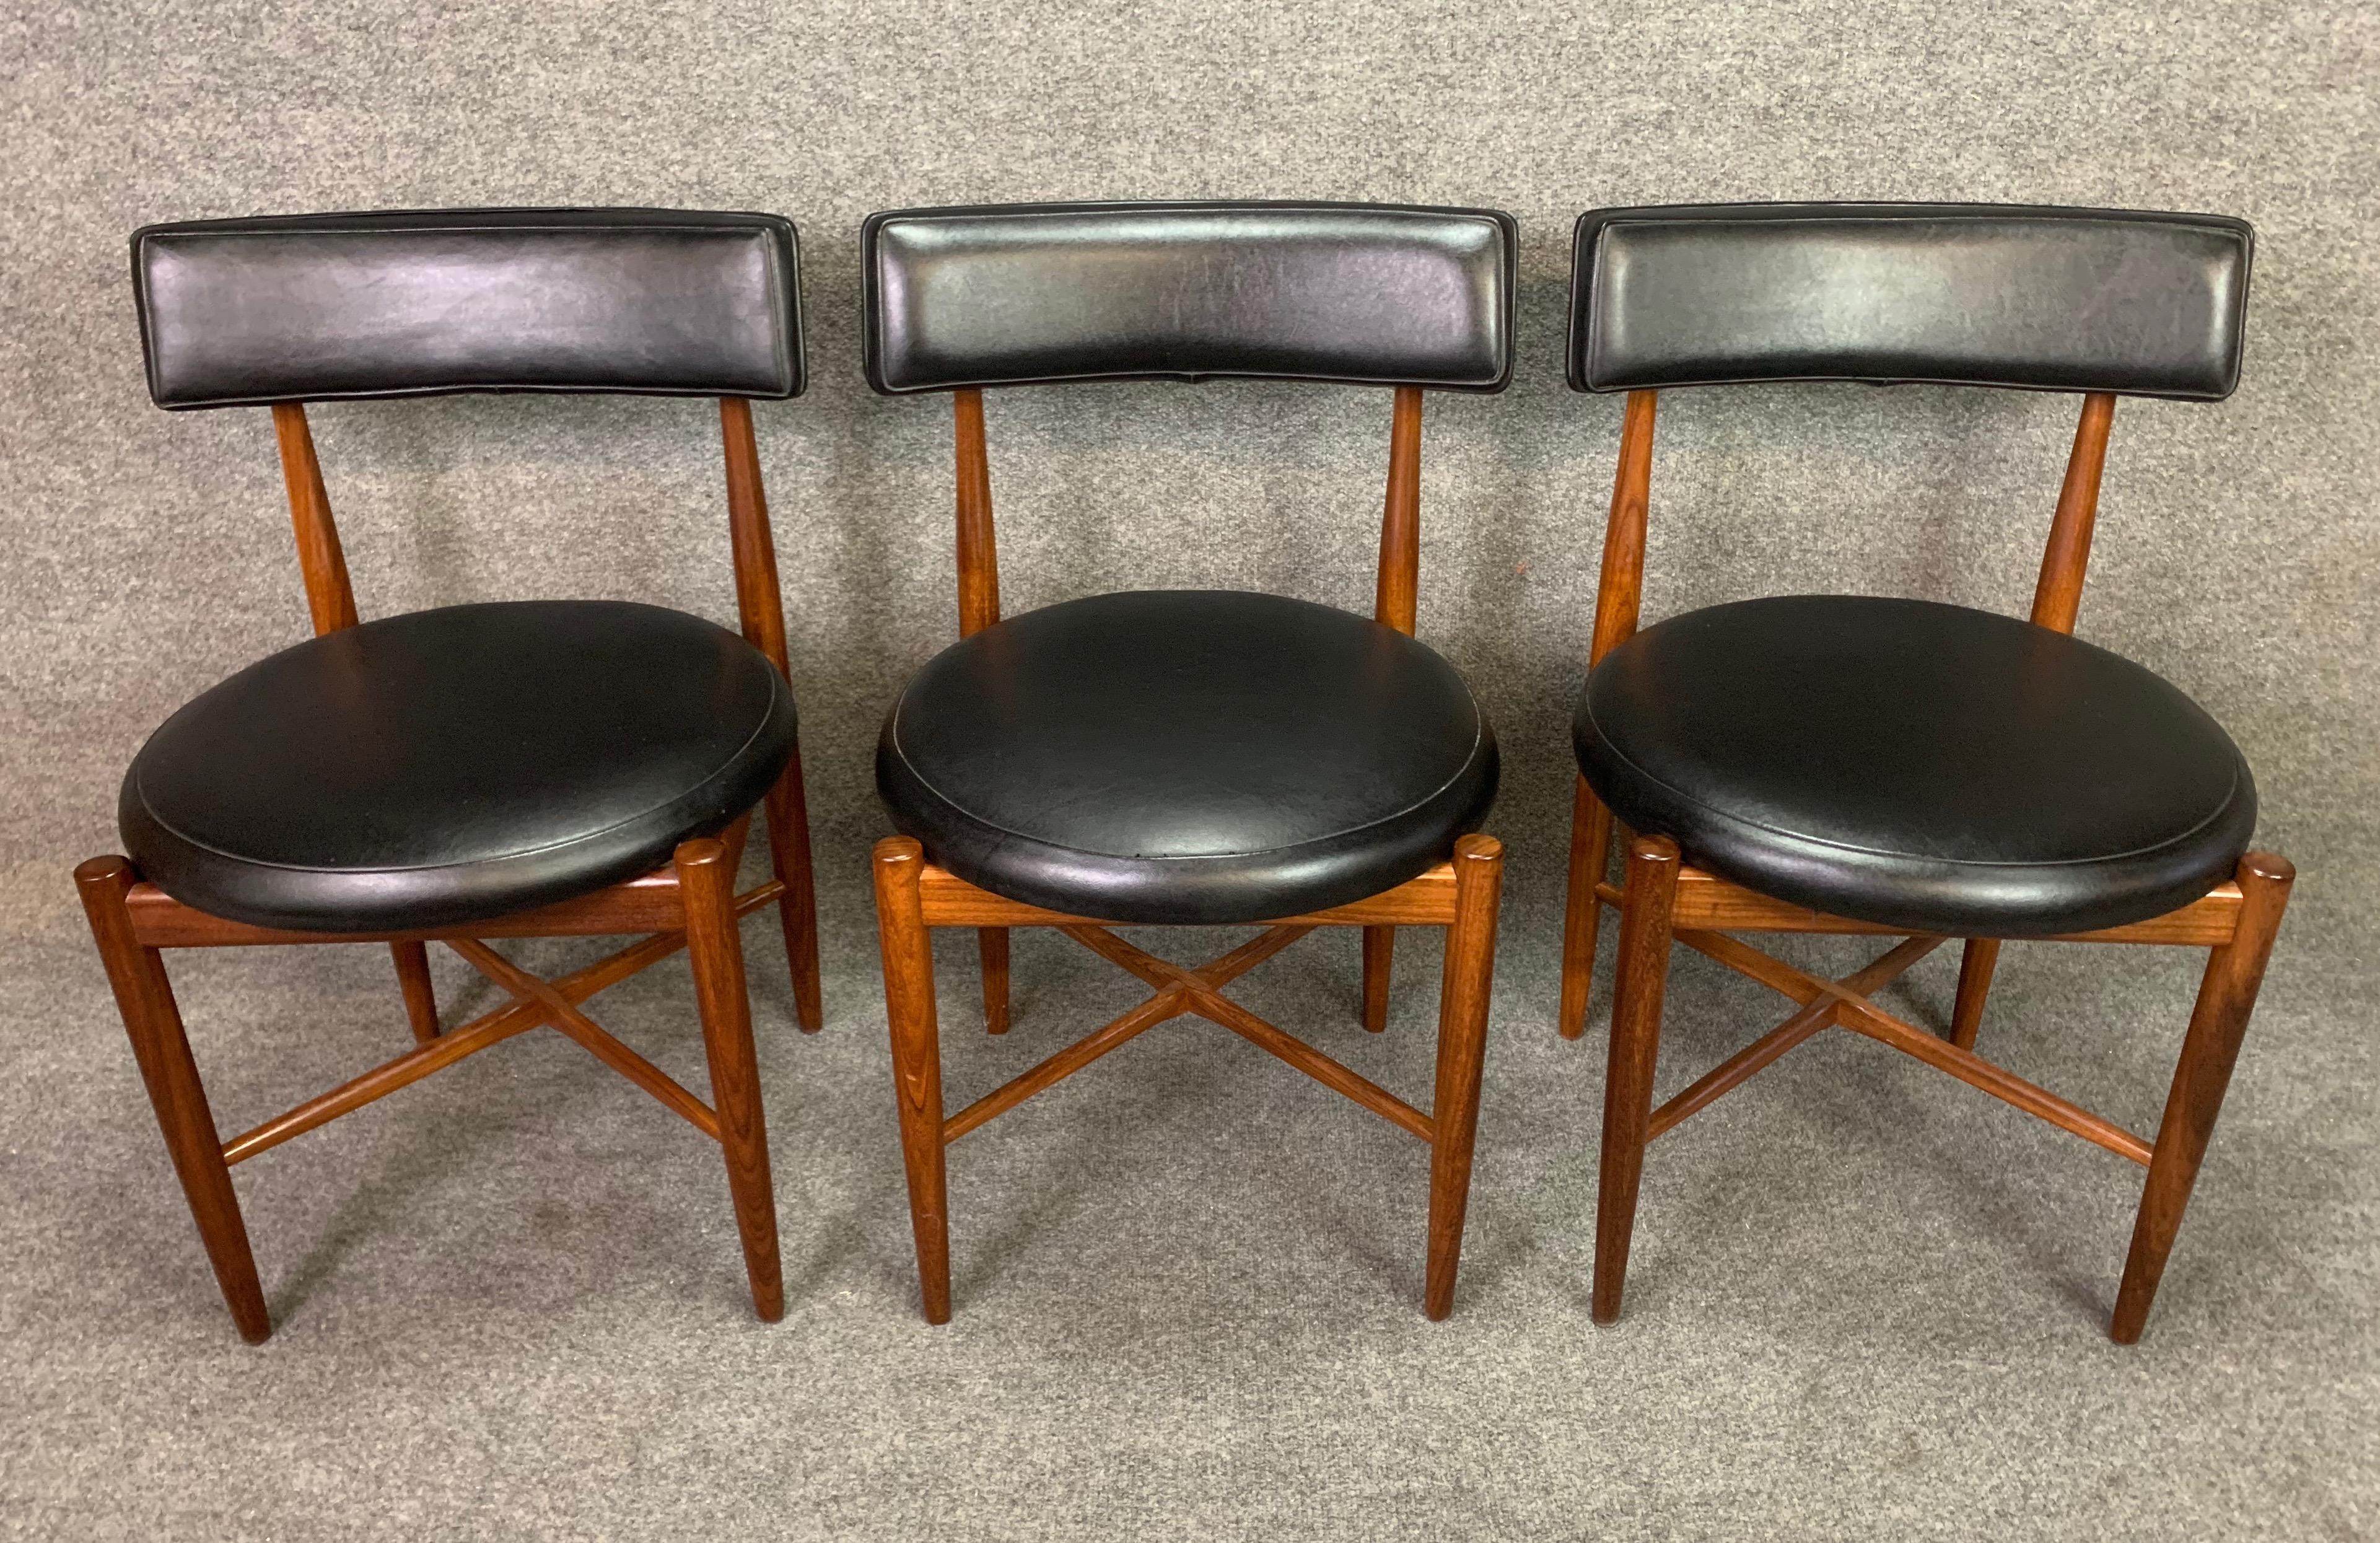 English Six Vintage British Mid Century Teak Dining Chairs by Victor Wilkins for G Plan